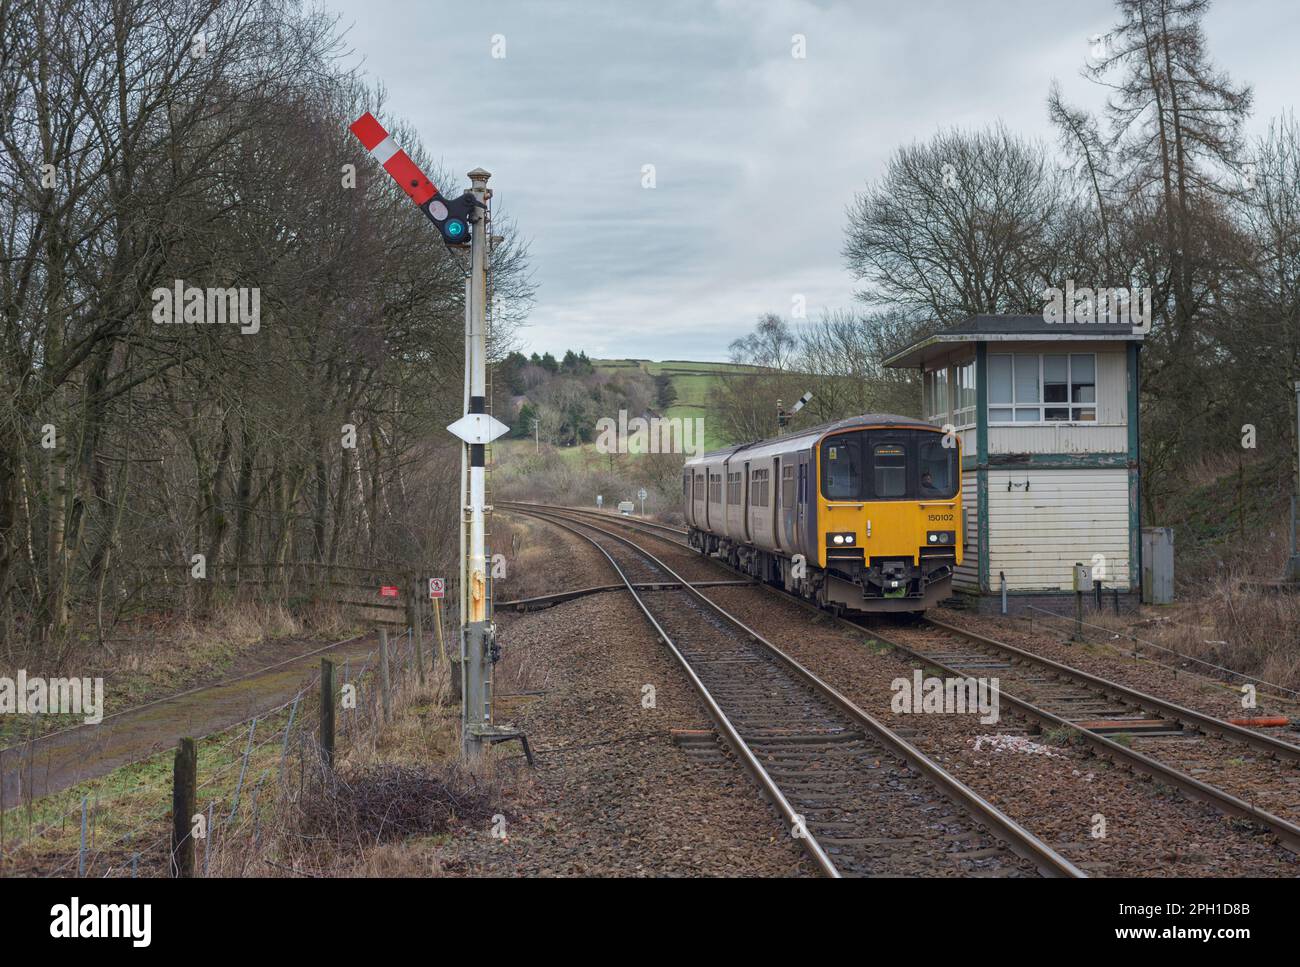 Northern Rail class 150 Diesel multiple unit train 150102 passing the mechanical signal box and semaphore signals at Chapel-En-Le-Frith, Derbyshire Stock Photo